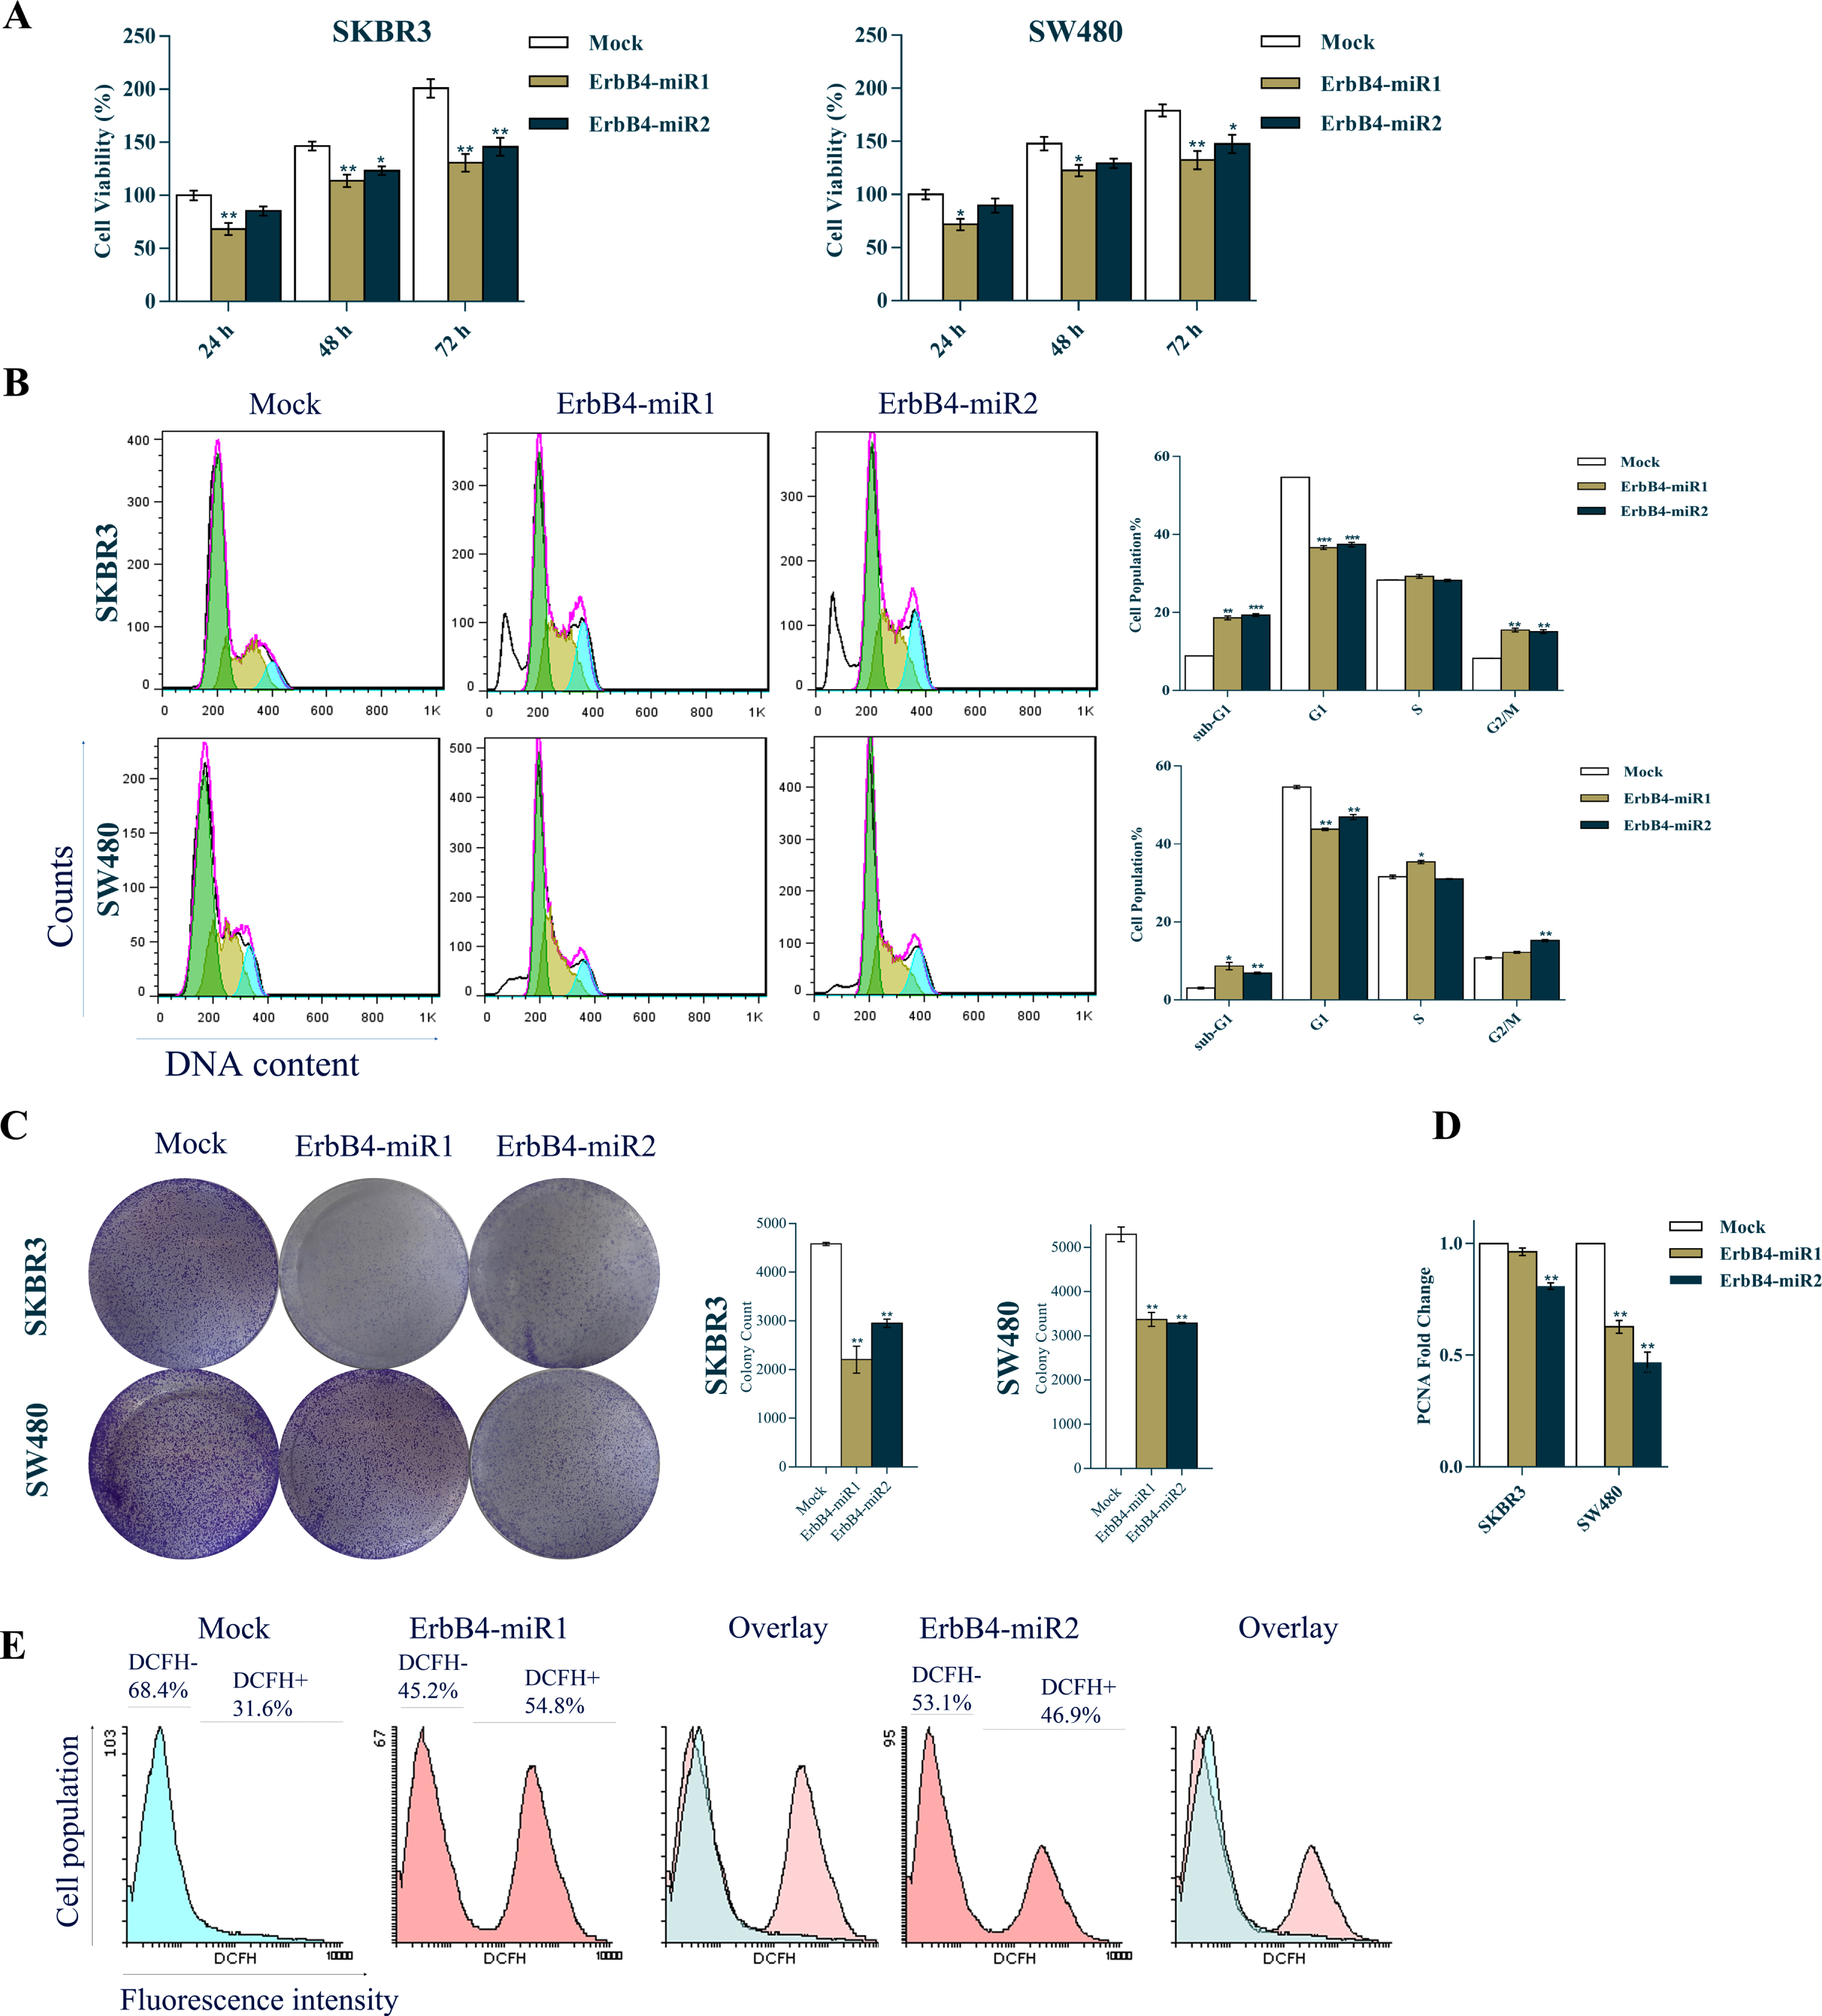 Effects of ErbB4-miR1/2 overexpression on cell cycle, proliferation, and ROS production of breast and colon cancer cells. (A) MTT assay results of SKBR3 and SW480 cells at 0, 24, 48, and 72 h after transfection with ErbB4-miR1/2 or mock vectors. (B) Cell cycle histogram and bar plot analysis 48 h after transfection of SKBR3 and SW480 cells with ErbB4-miR1/2 or mock control vectors. (C) Colony formation assay showing the effect of ErbB4-miR1/2 versus mock vectors on SKBR3 and SW480 cell proliferation. (D) RT-qPCR analysis showing the effect of ErbB4-miR1/2 versus mock vectors on PCNA mRNA expression 48 h after transfection of SKBR3 and SW480 cells. (E) ROS production analysis in SKBR3 cells 48 h after transfection with ErbB4-miR1/2 or mock vectors. Assays were performed in triplicate. Means±SEM was shown. Statistical analysis was performed using Student’s t-test and one-way ANOVA. *, **, *** indicate p < 0.05, p < 0.01, and p < 0.001, respectively.